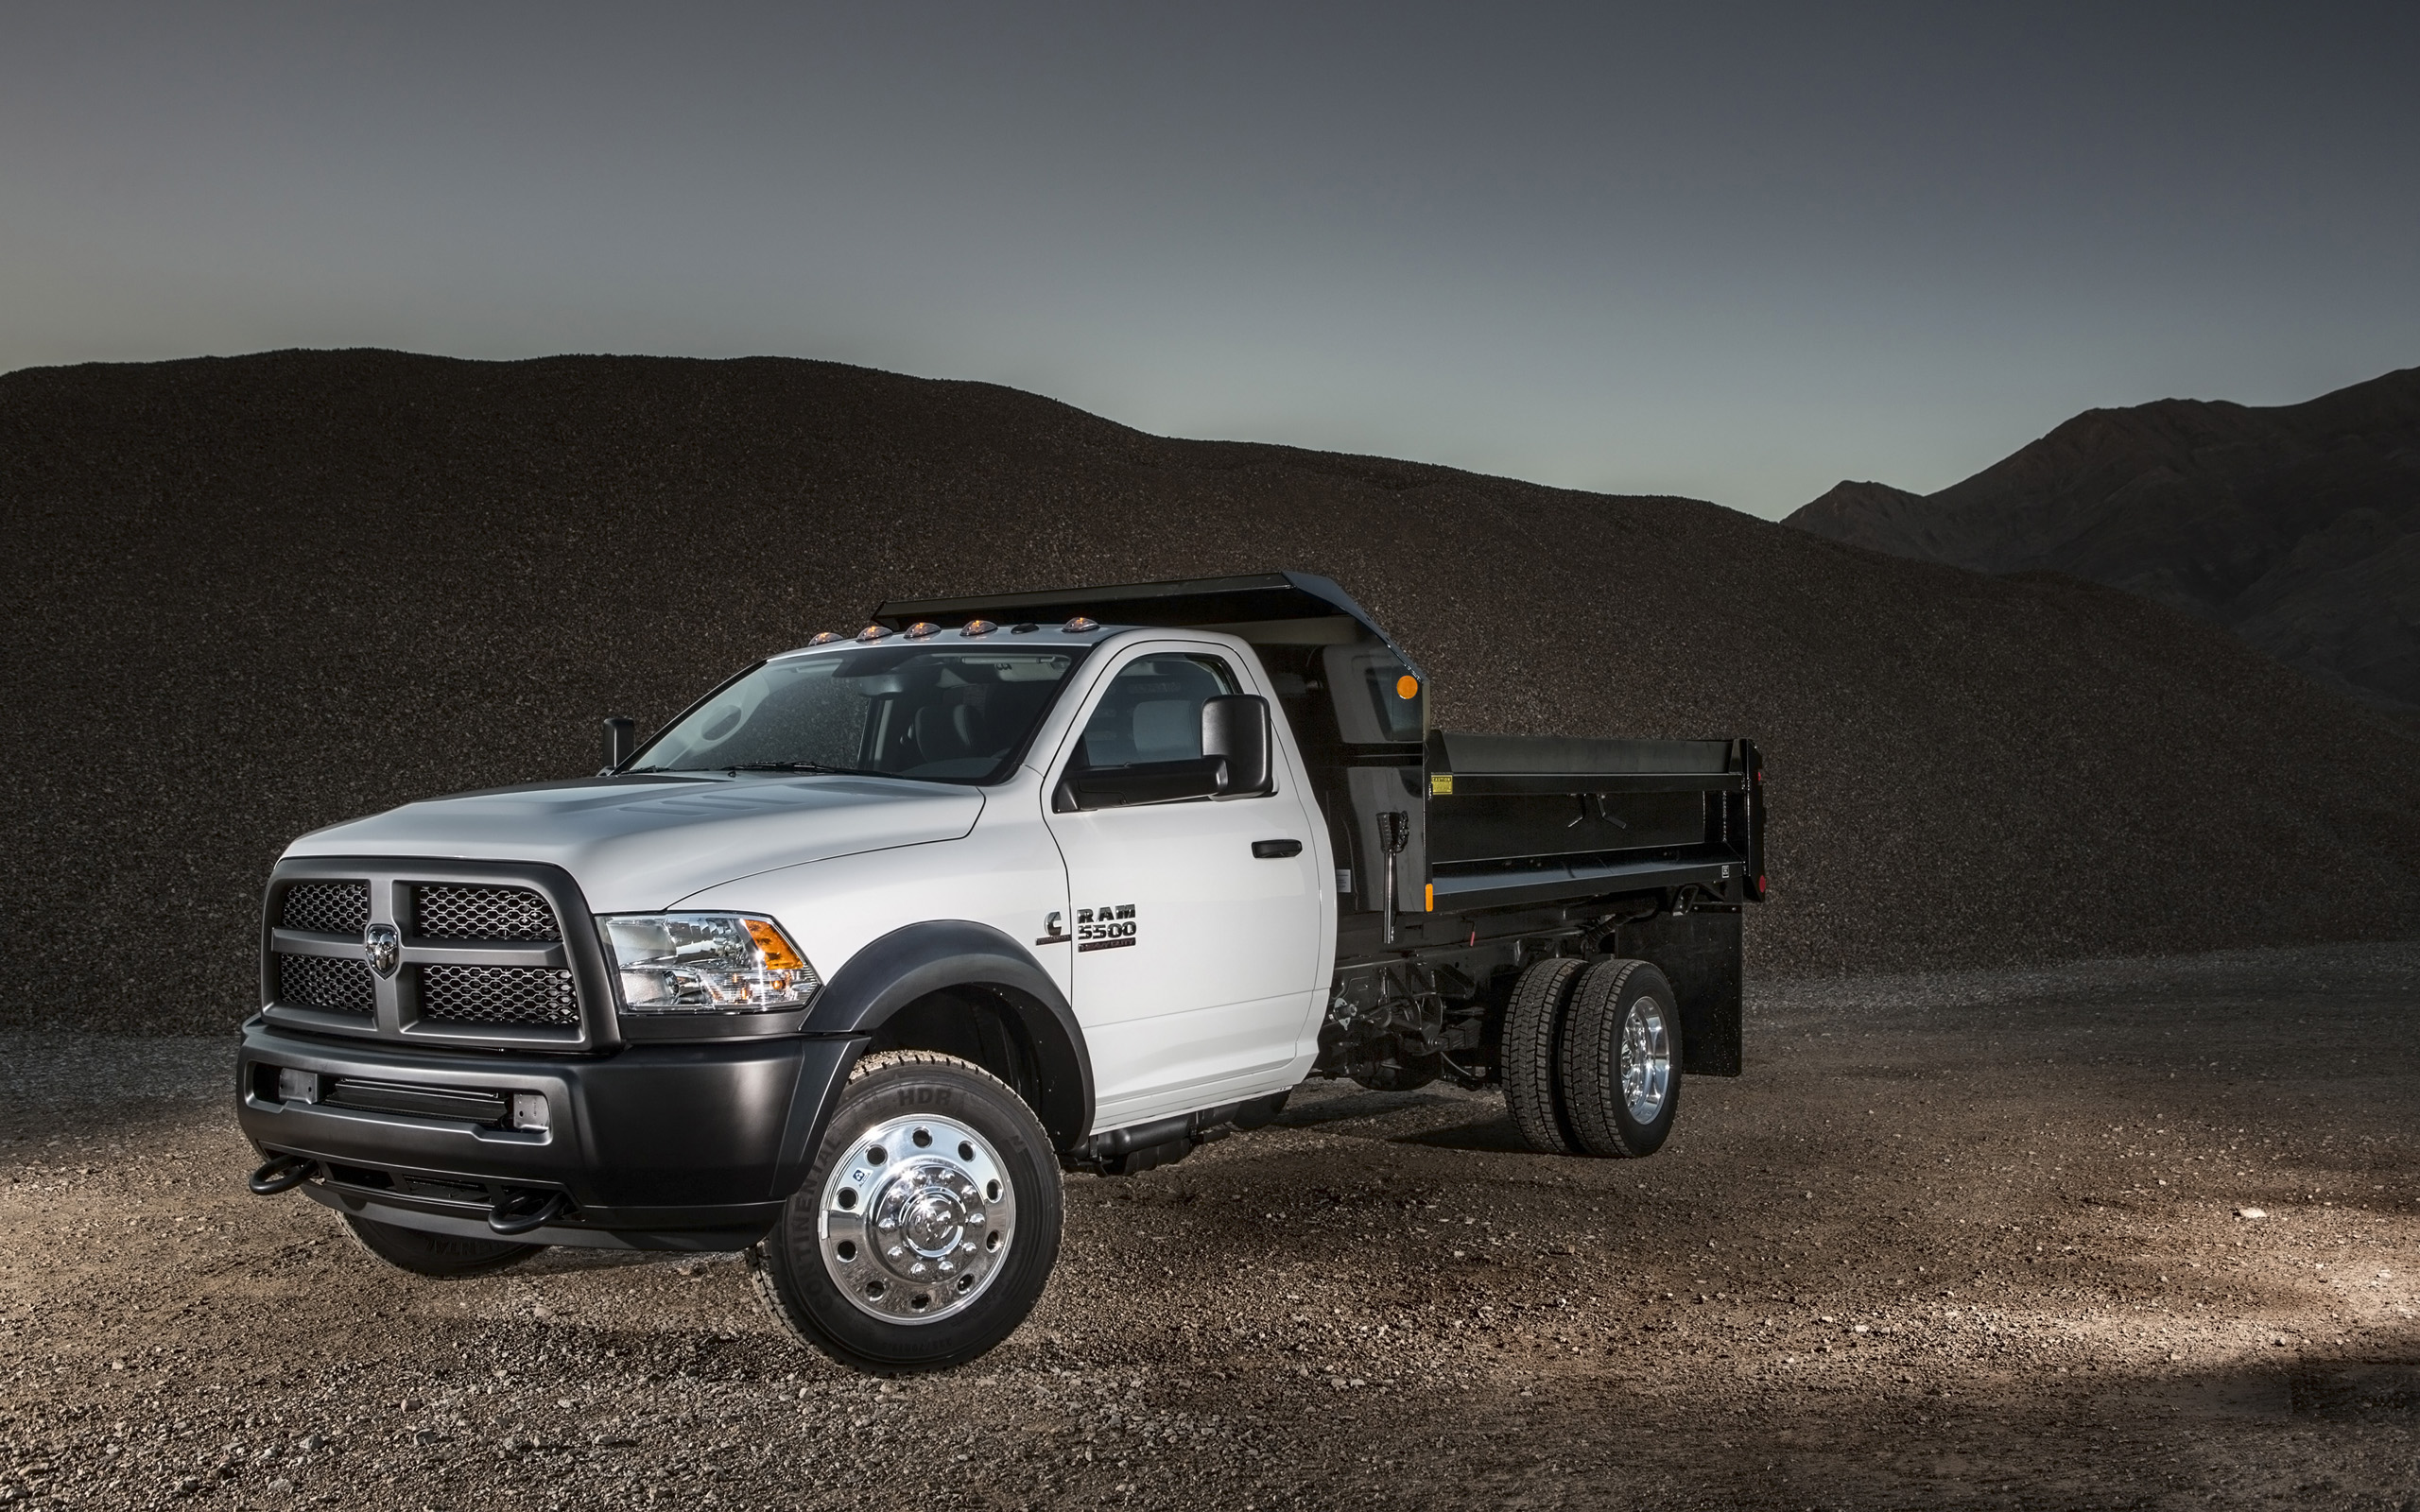 2014, Dodge, Ram, 5500, 4x4, Chassis, Cab Wallpaper